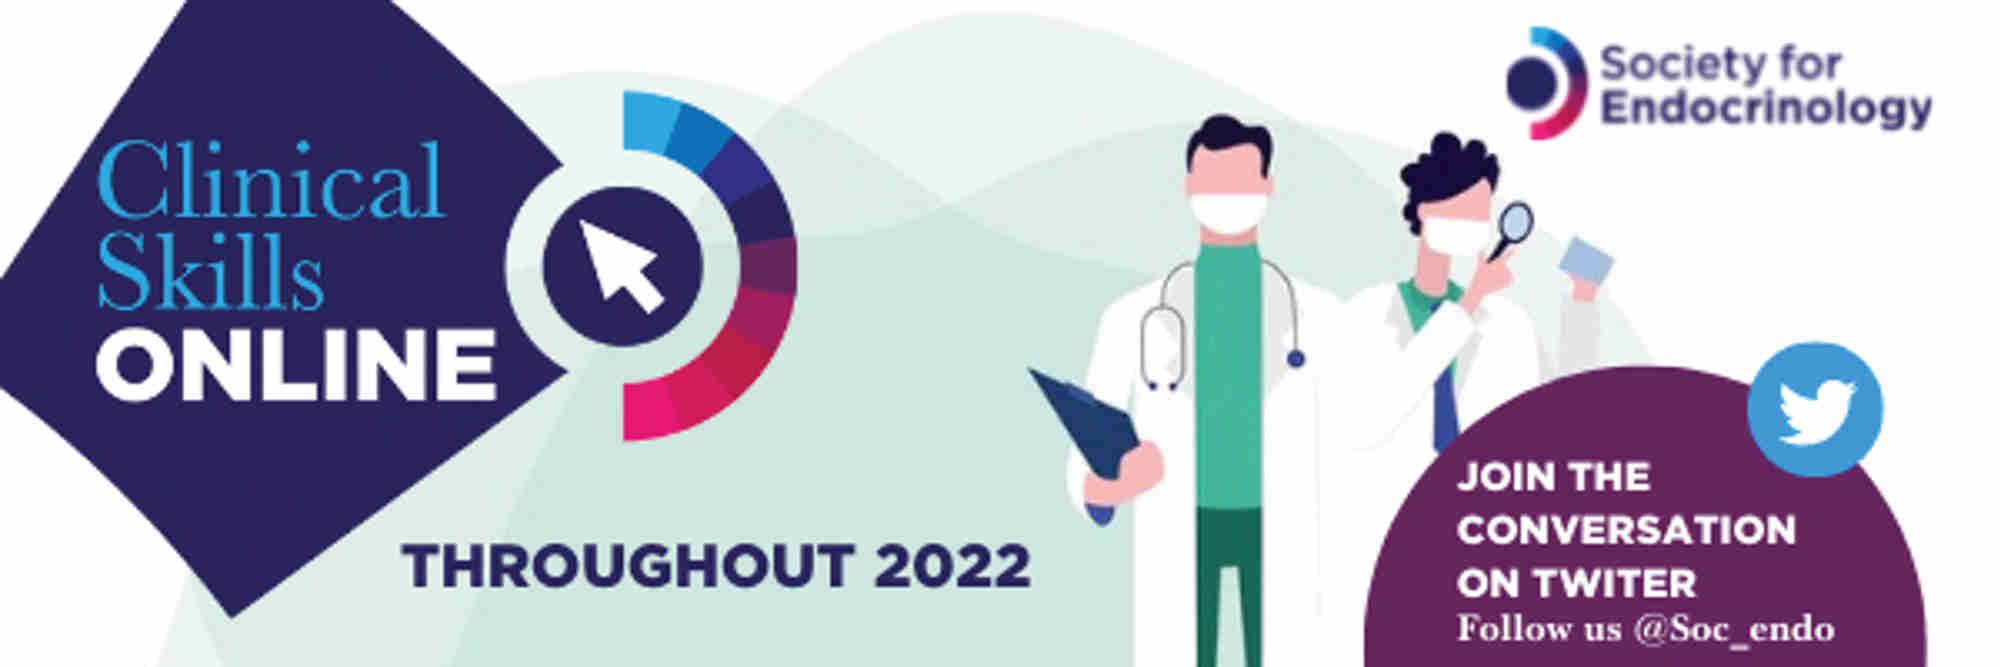 Clinical Skills 2022 Email Banner (600 × 200Px)